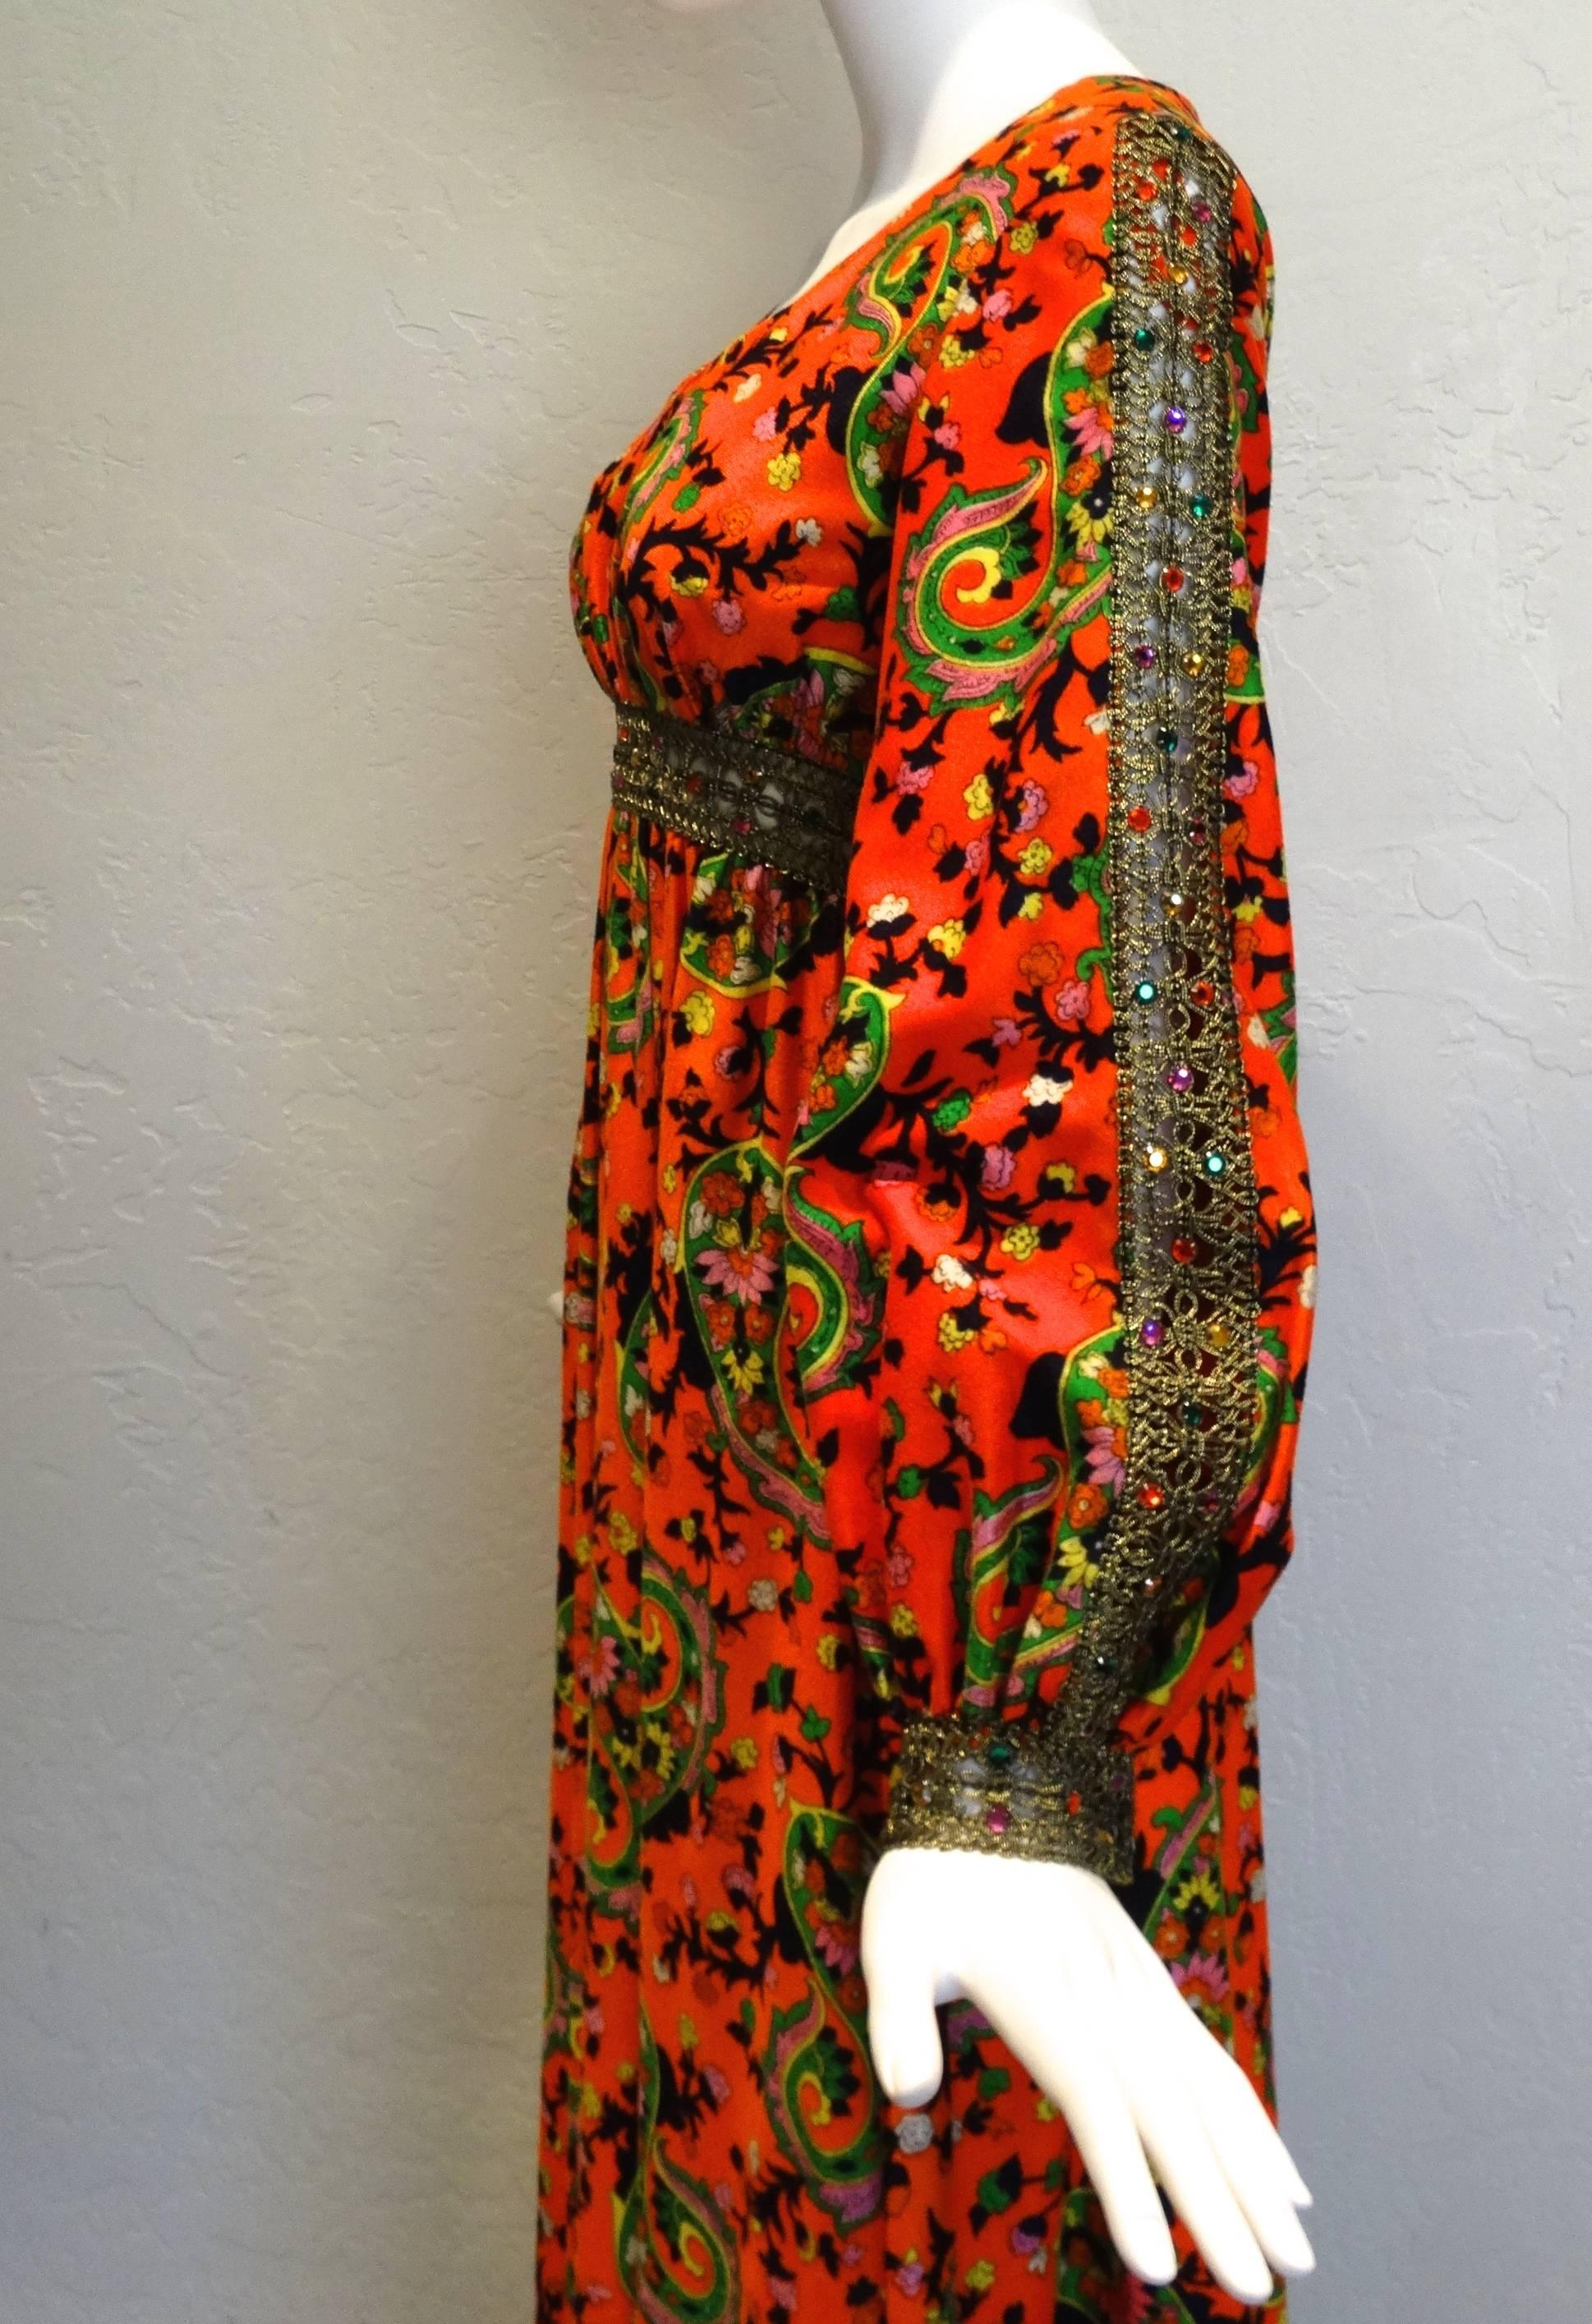 Beautiful vintage Miss Magnin for I.Imagnin maxi dress! Hermes orange bodice, with 3-D 'paisley and floral design mixed together to create a stunning vintage print. Around the waist and down each sleeve like tiny gems in a spiders web, there are